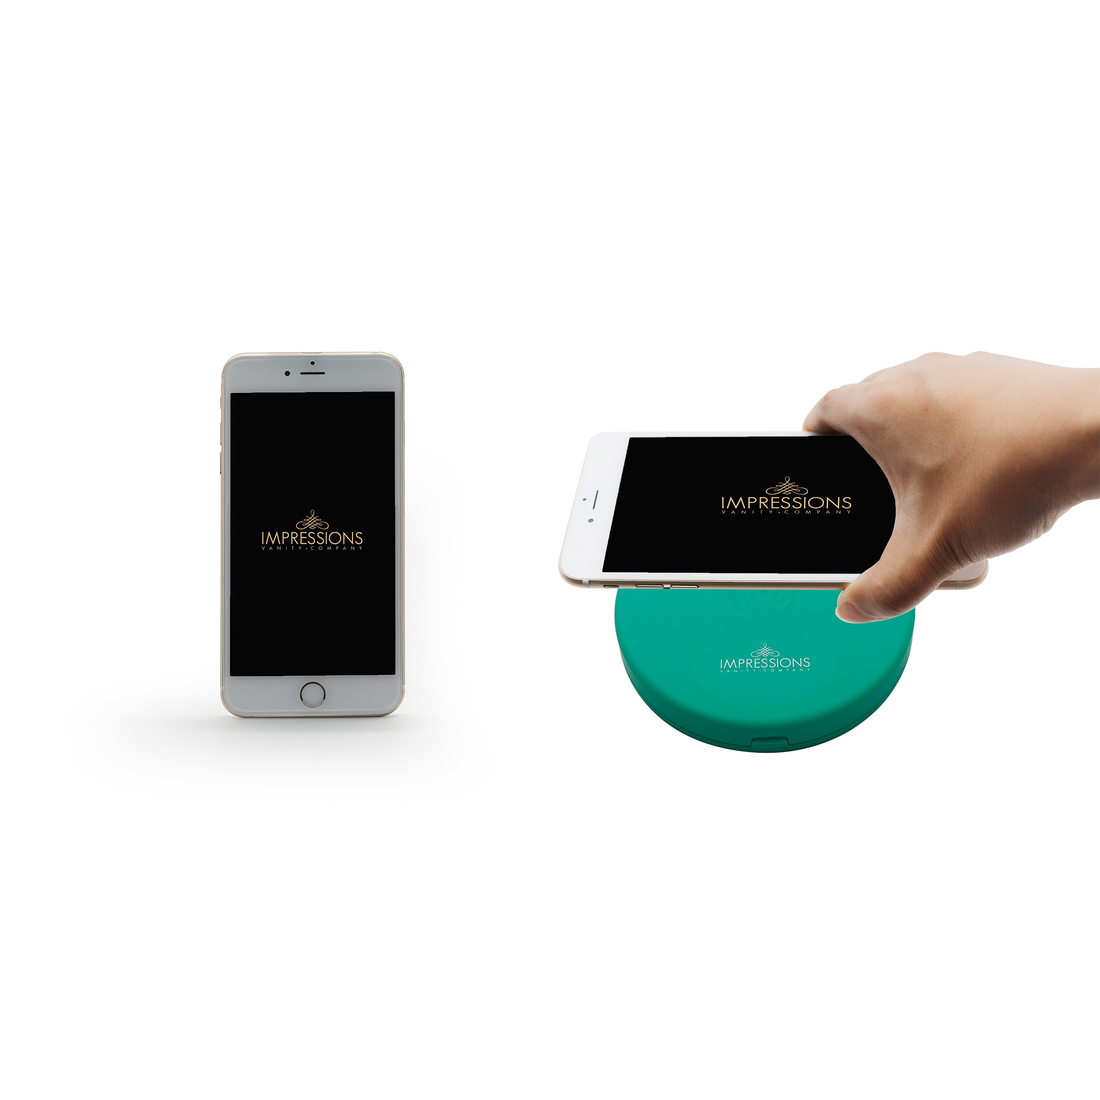 Ariel Compact Mirror with Wireless Power Bank Charging Base